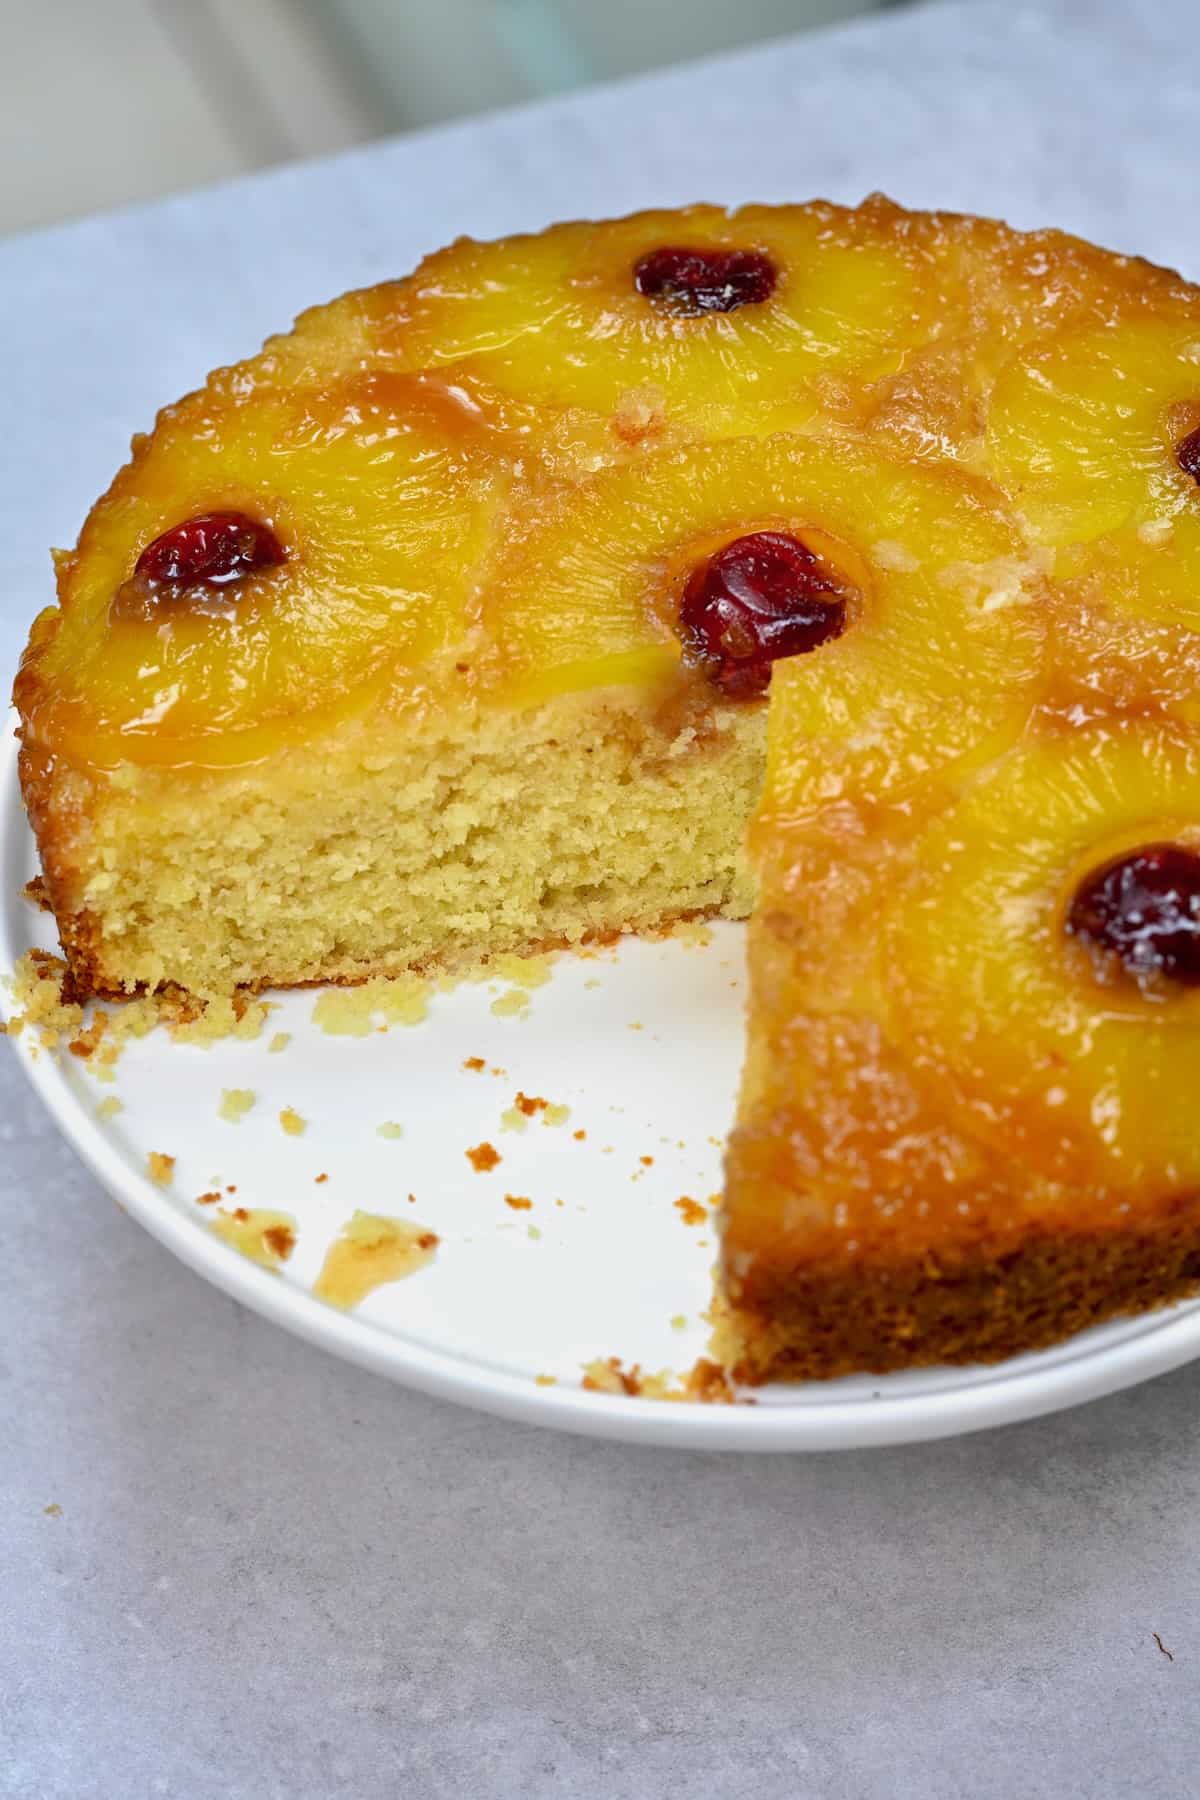 Pineapple upside down cake with a slice cut off